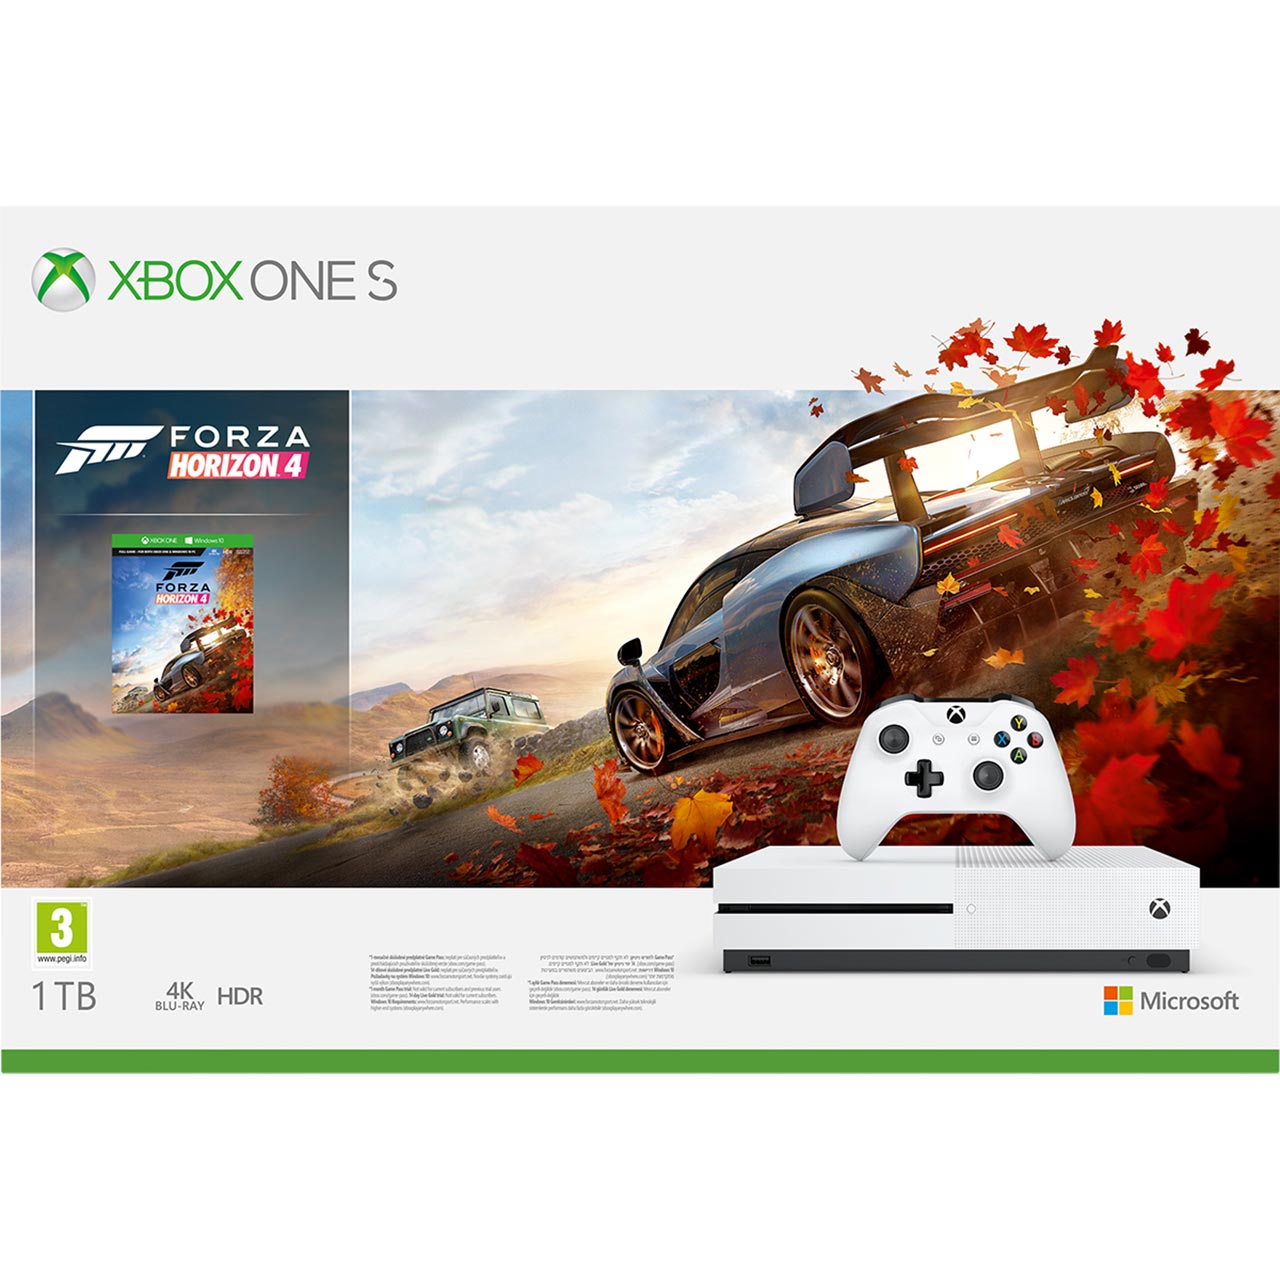 Xbox One S 1TB with Digital Download Code for Forza Horizon 4 White